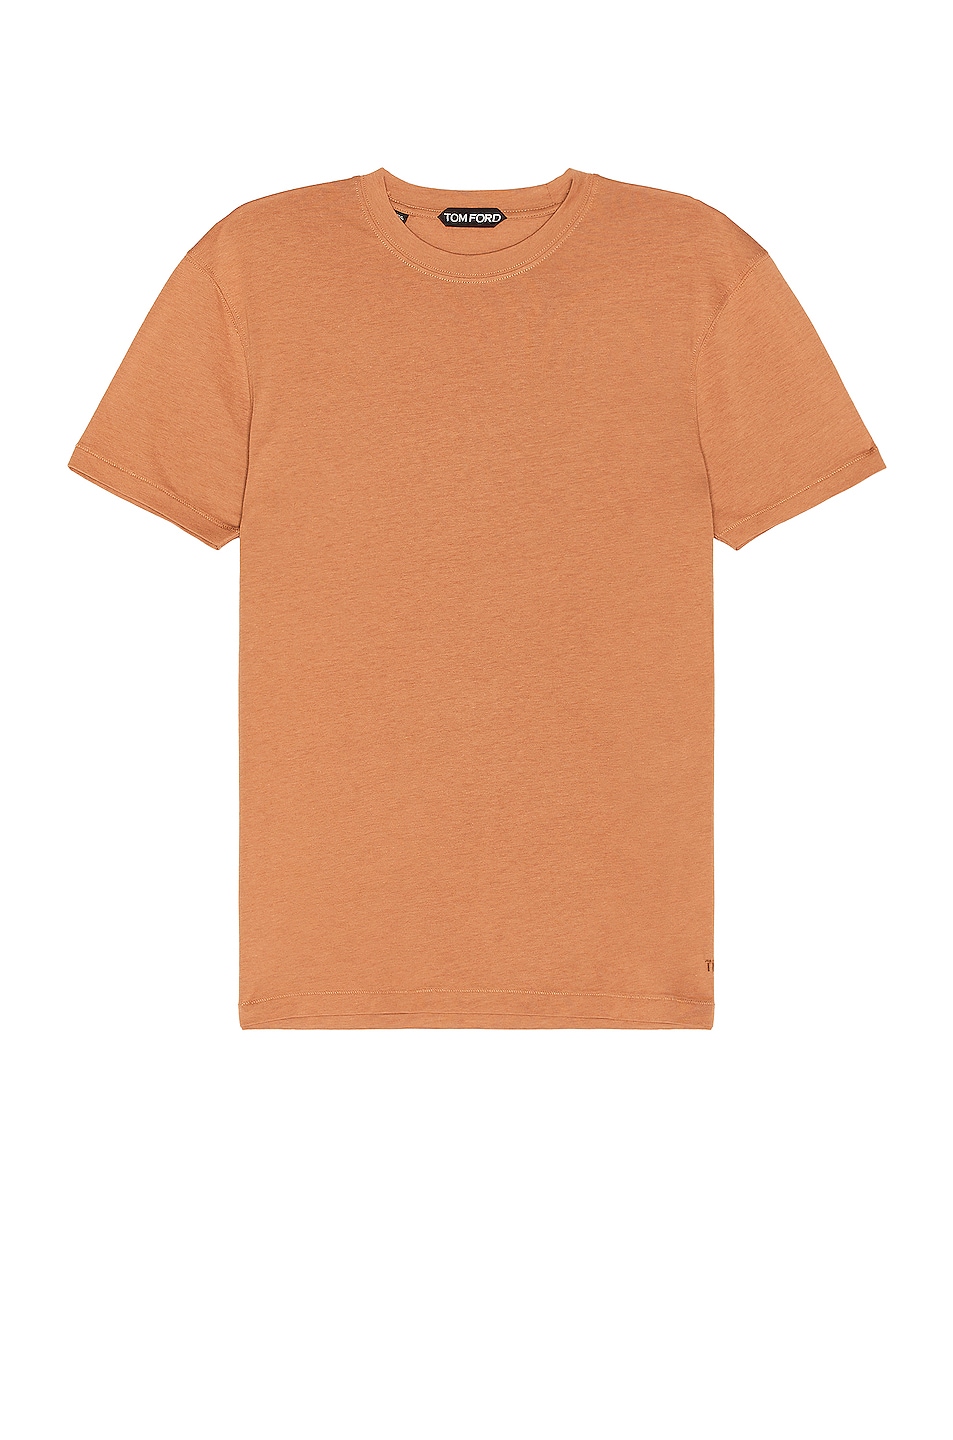 Image 1 of TOM FORD Short Sleeve Crew Neck T-shirt in Toffee